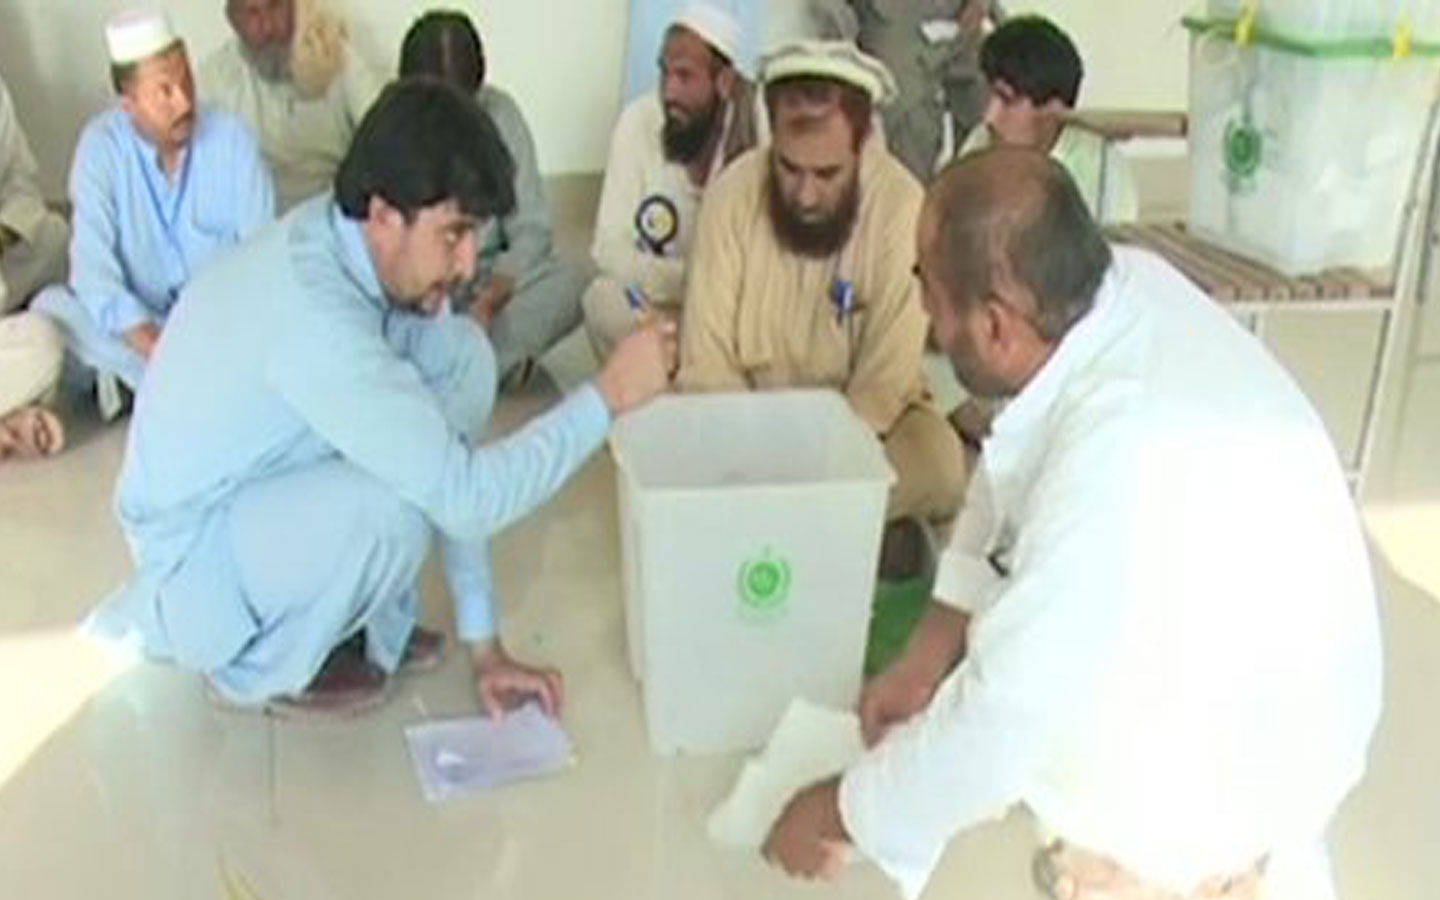 PTI bags 5, independent candidates 6 and JUI-F 3 seats in KP’s tribal polls